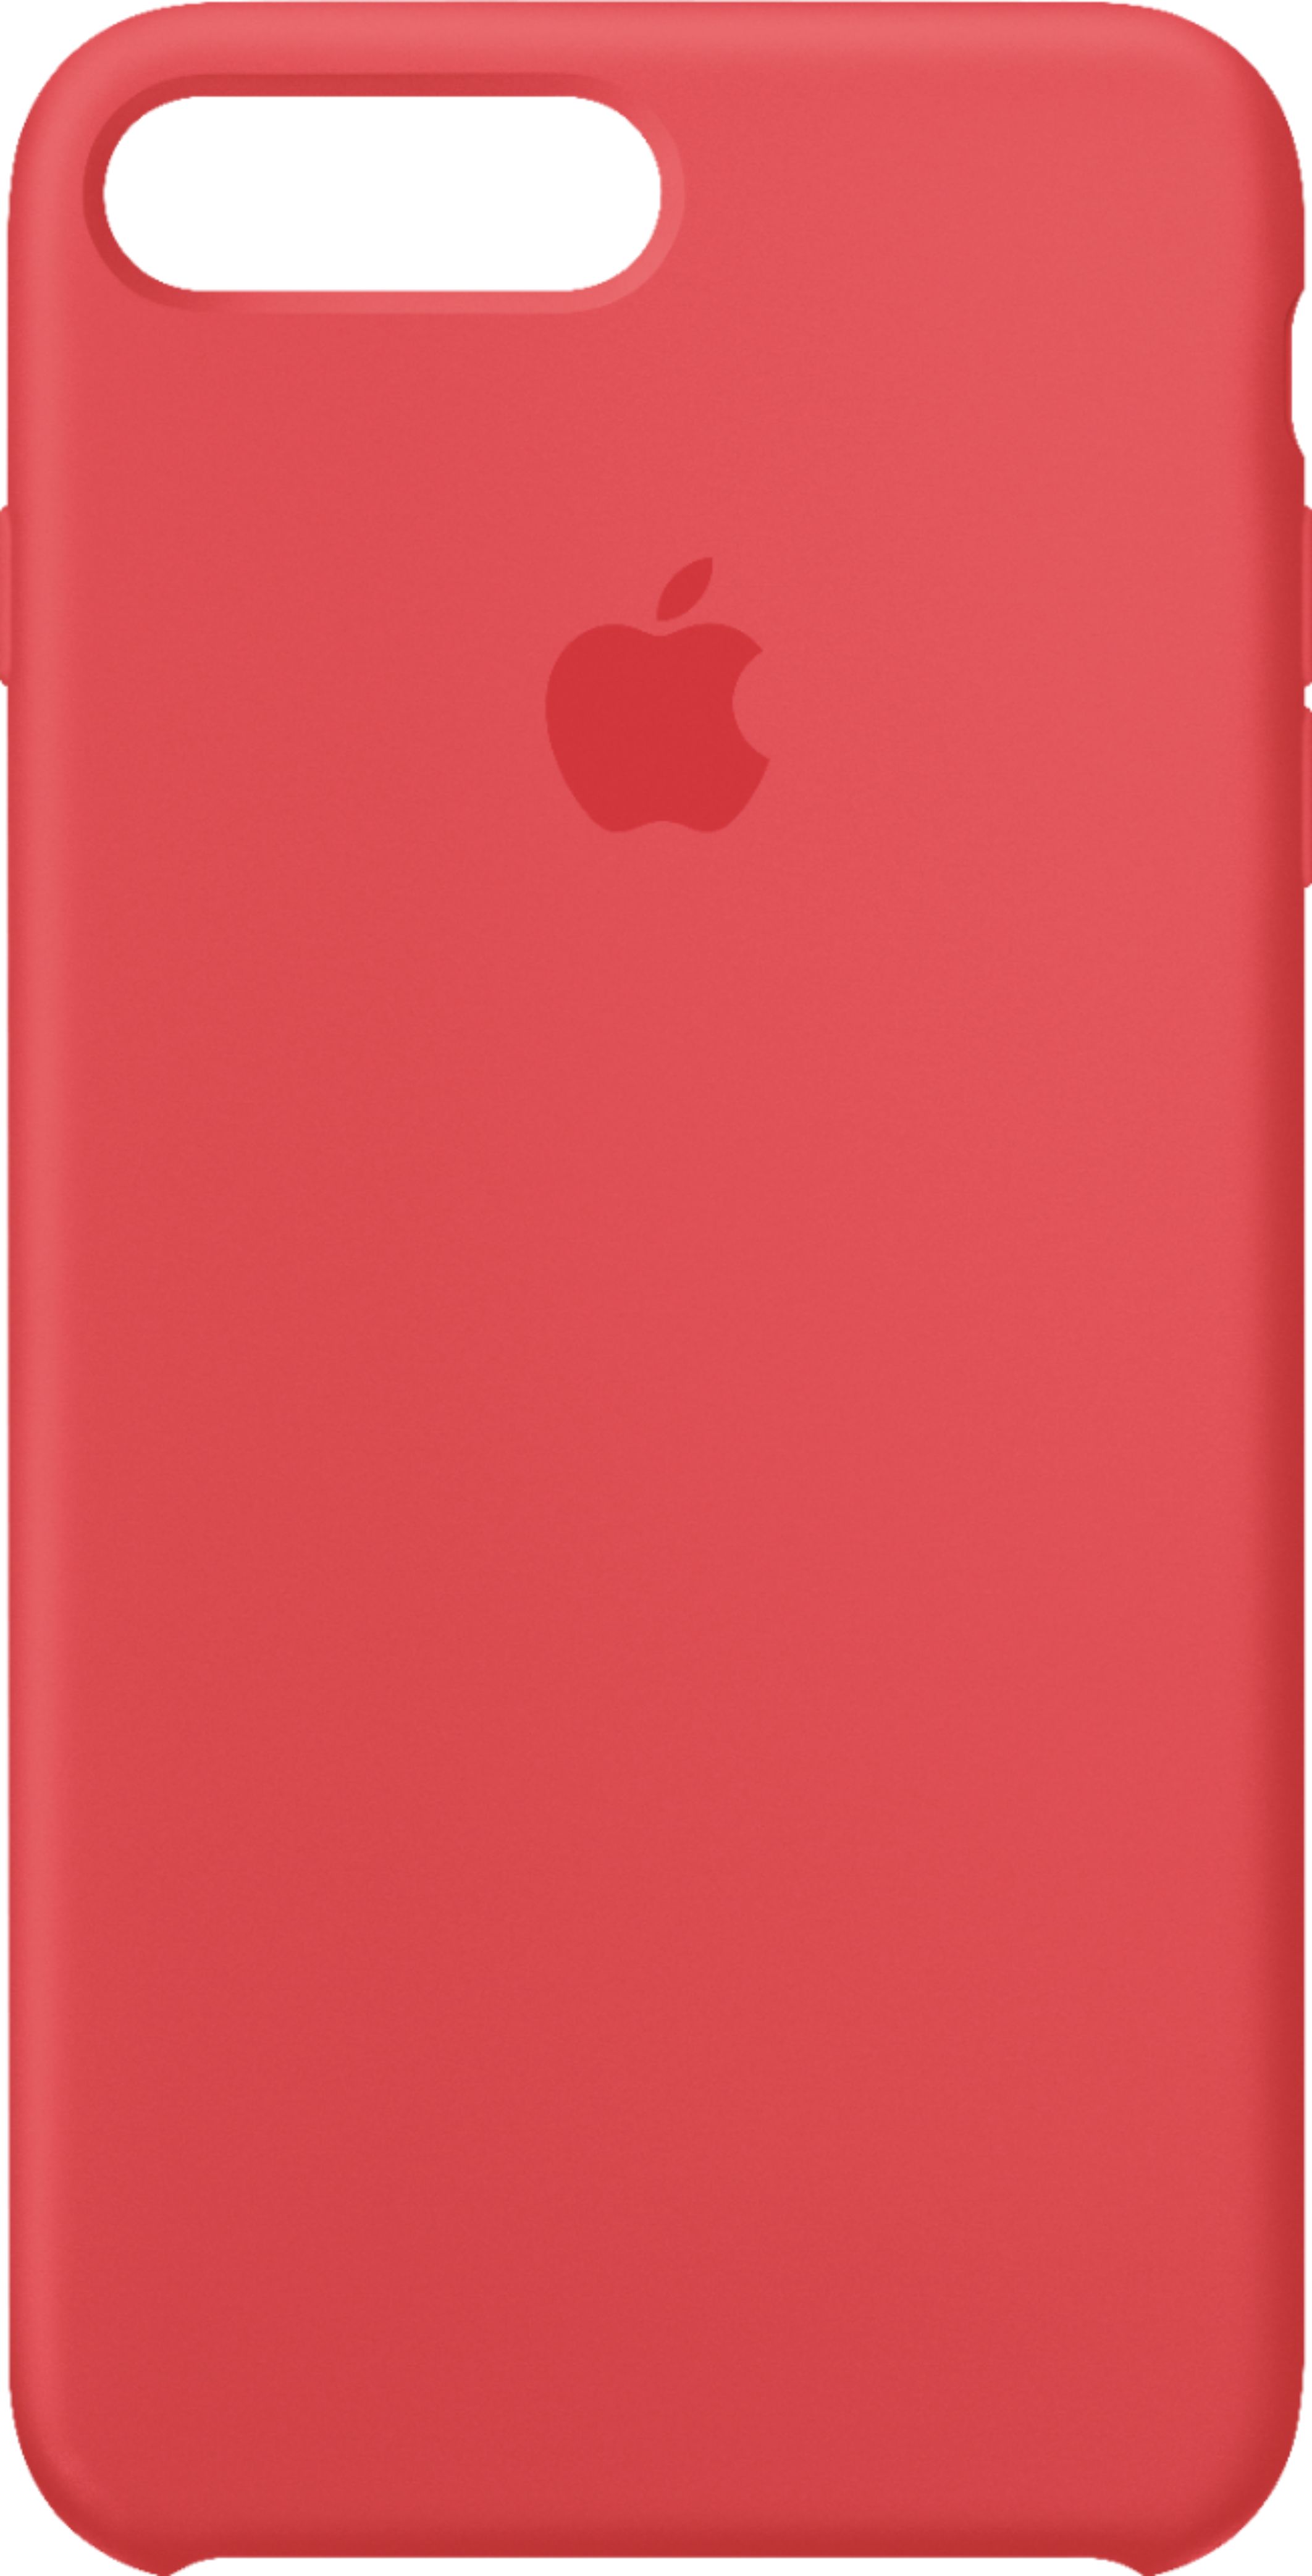 Apple iPhone® 8 Plus/7 Plus Silicone Case Red Raspberry MRFW2ZM/A - Best Buy